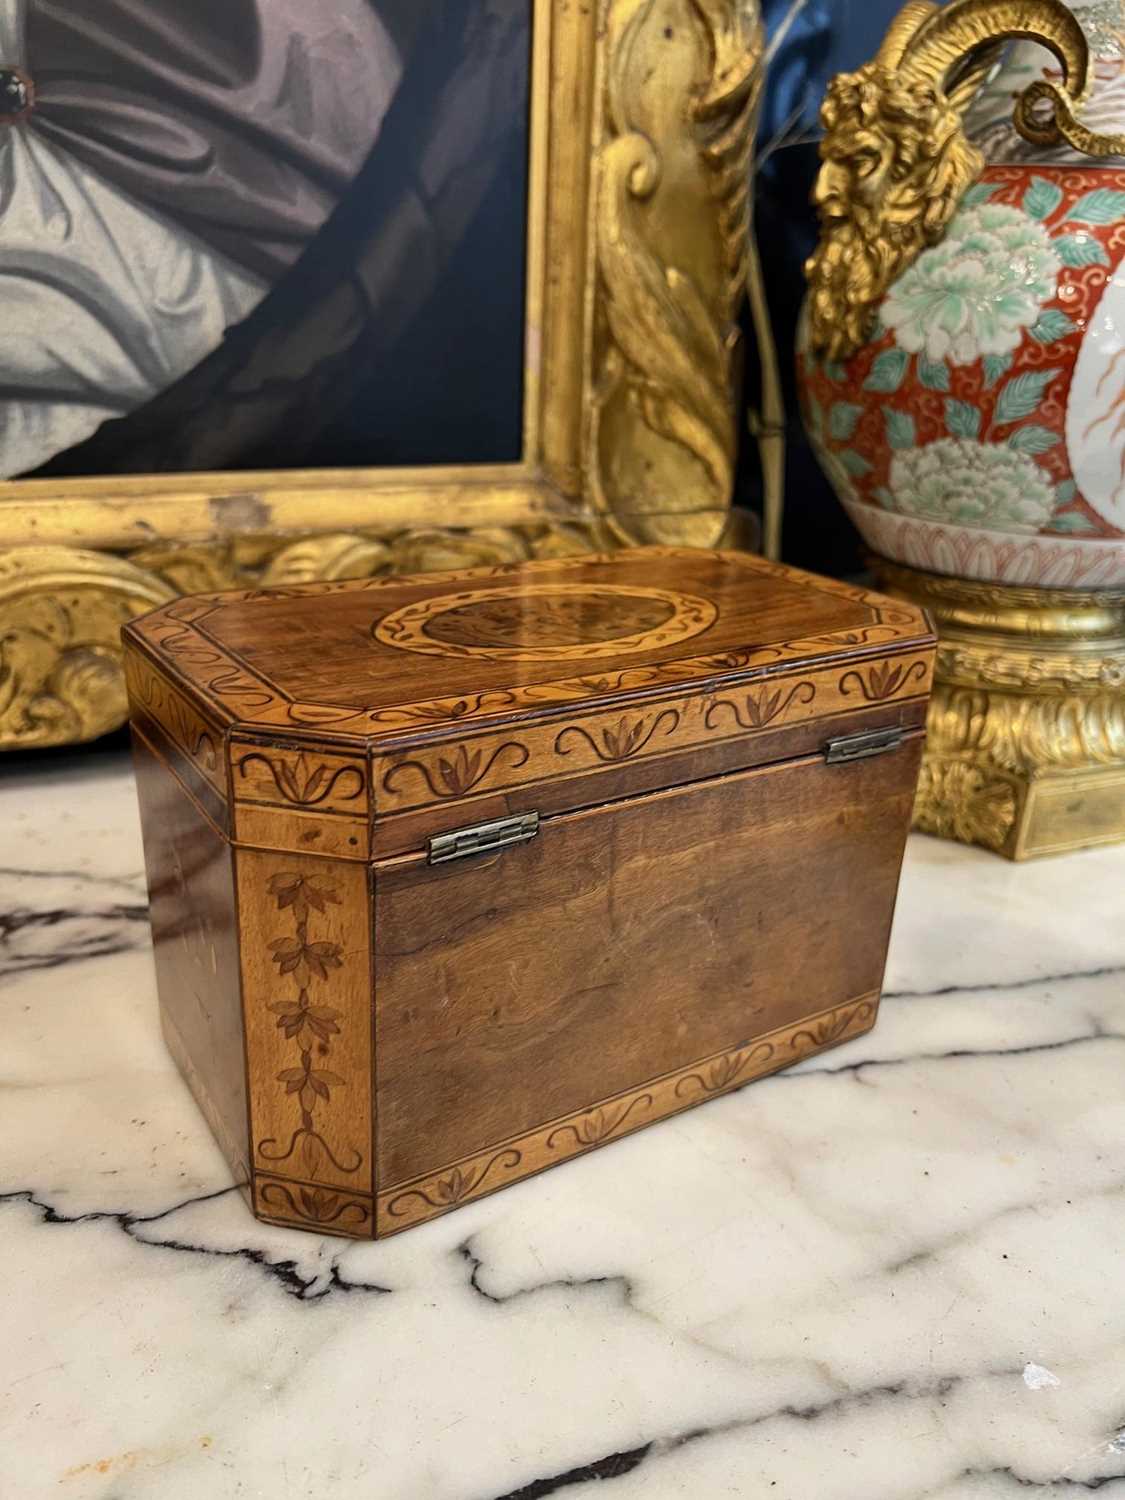 A FINE LATE 18TH / EARLY 19TH CENTURY INLAID SATINWOOD TEA CADDY - Image 5 of 7